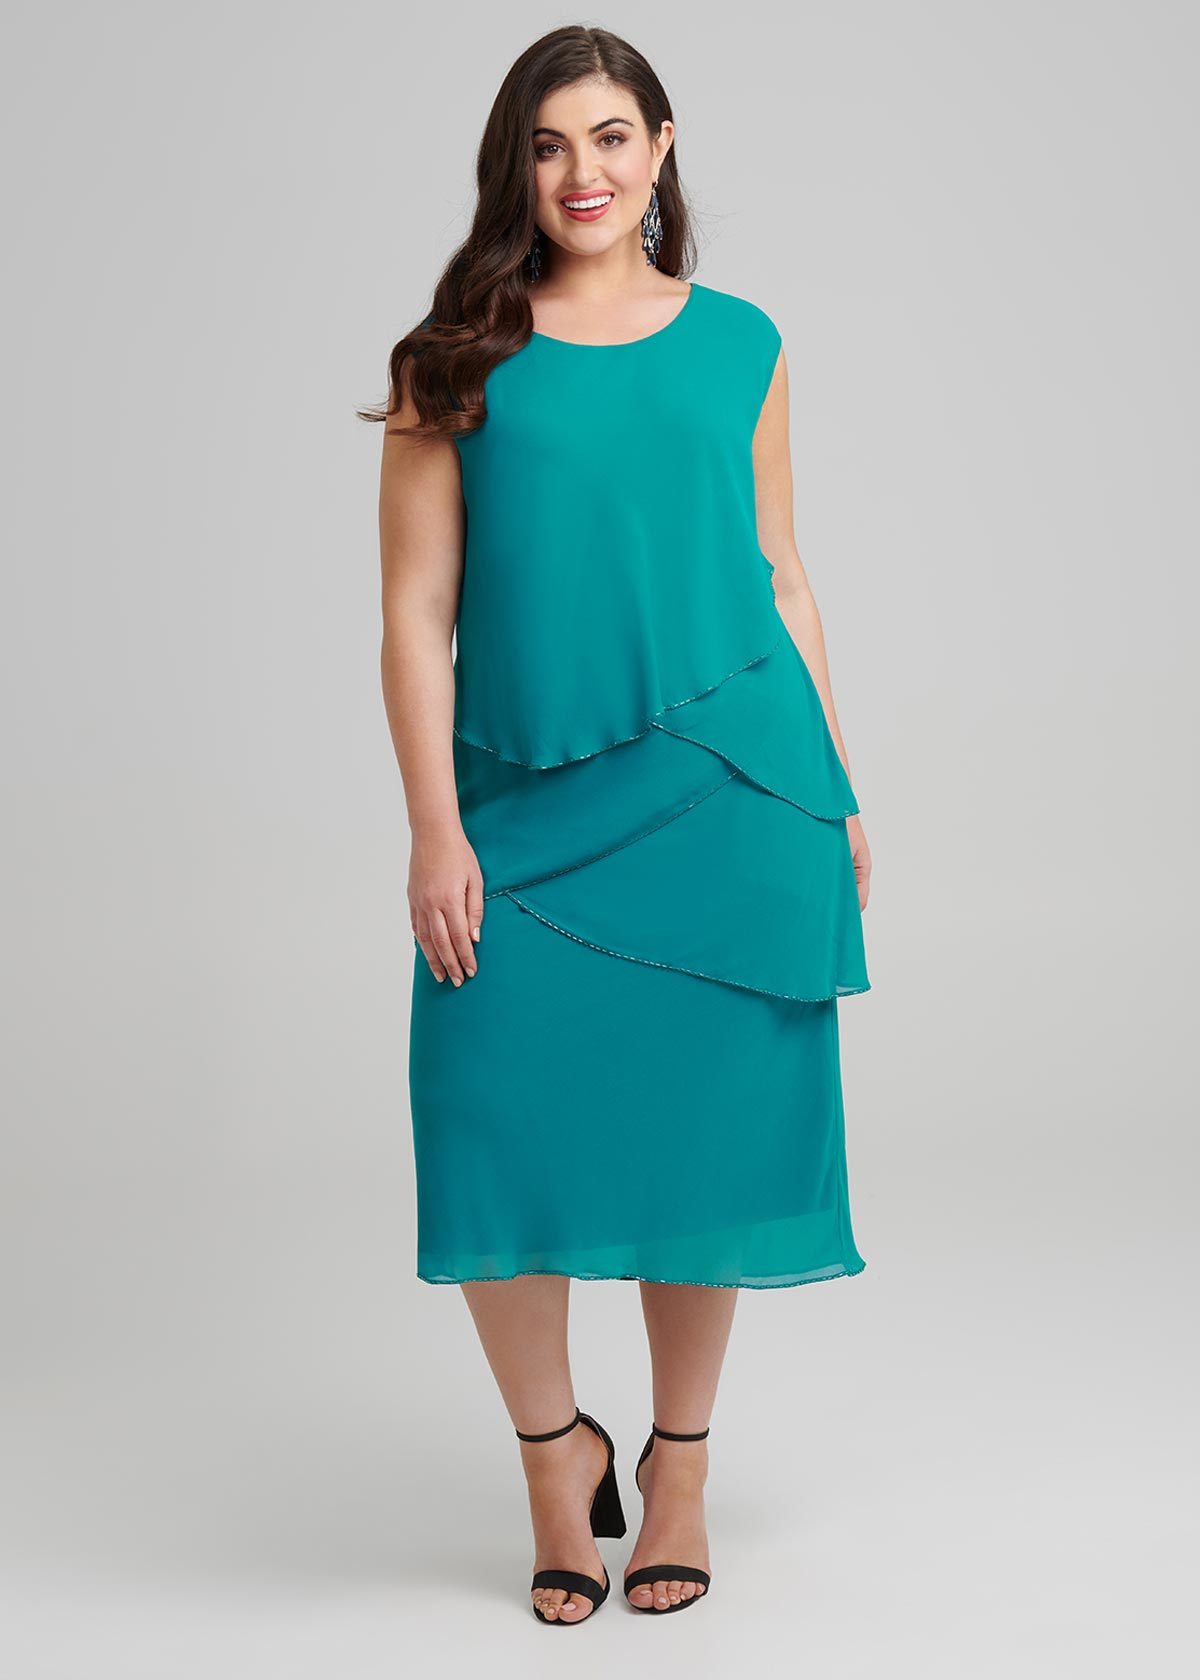 Shop Julie Cocktail Dress in blue in sizes 12 to 24